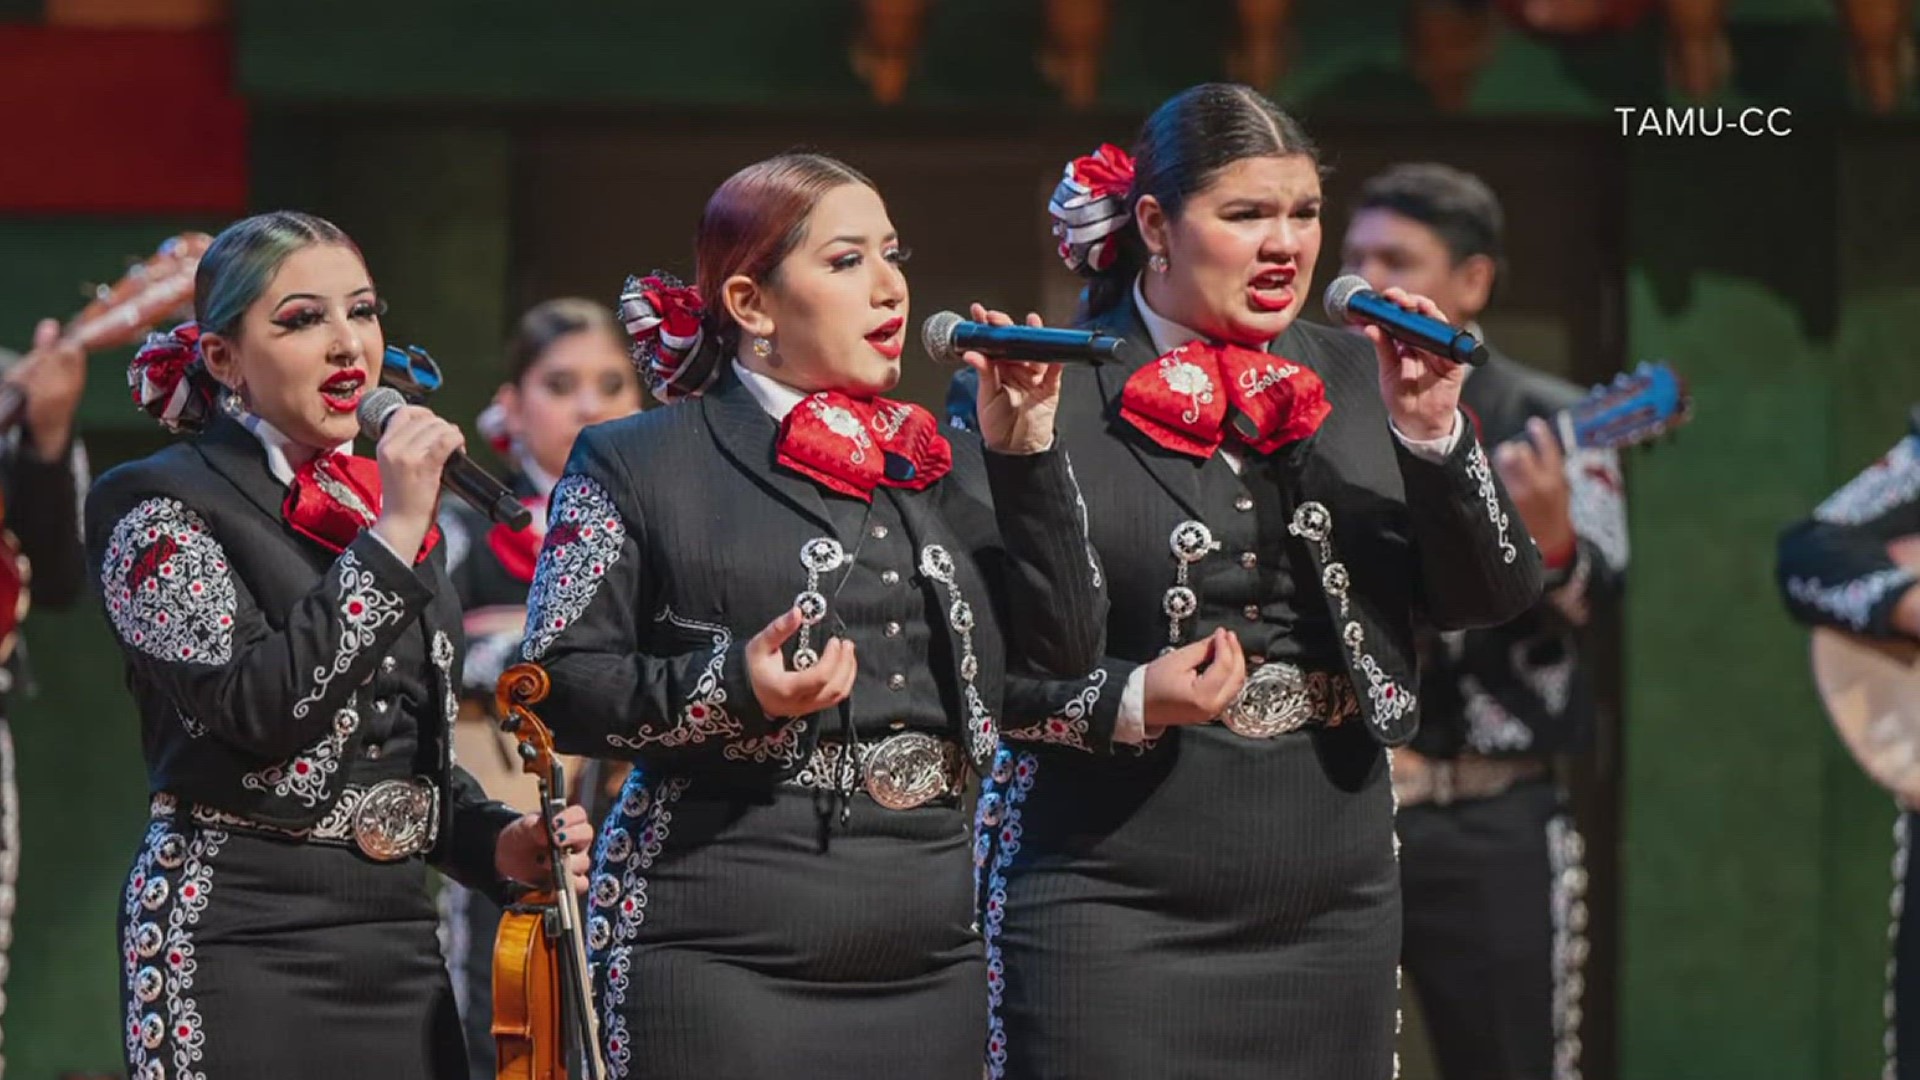 The five-day festival begins Wednesday. Mariachi groups from Las Vegas and across Texas are scheduled to perform throughout the week.